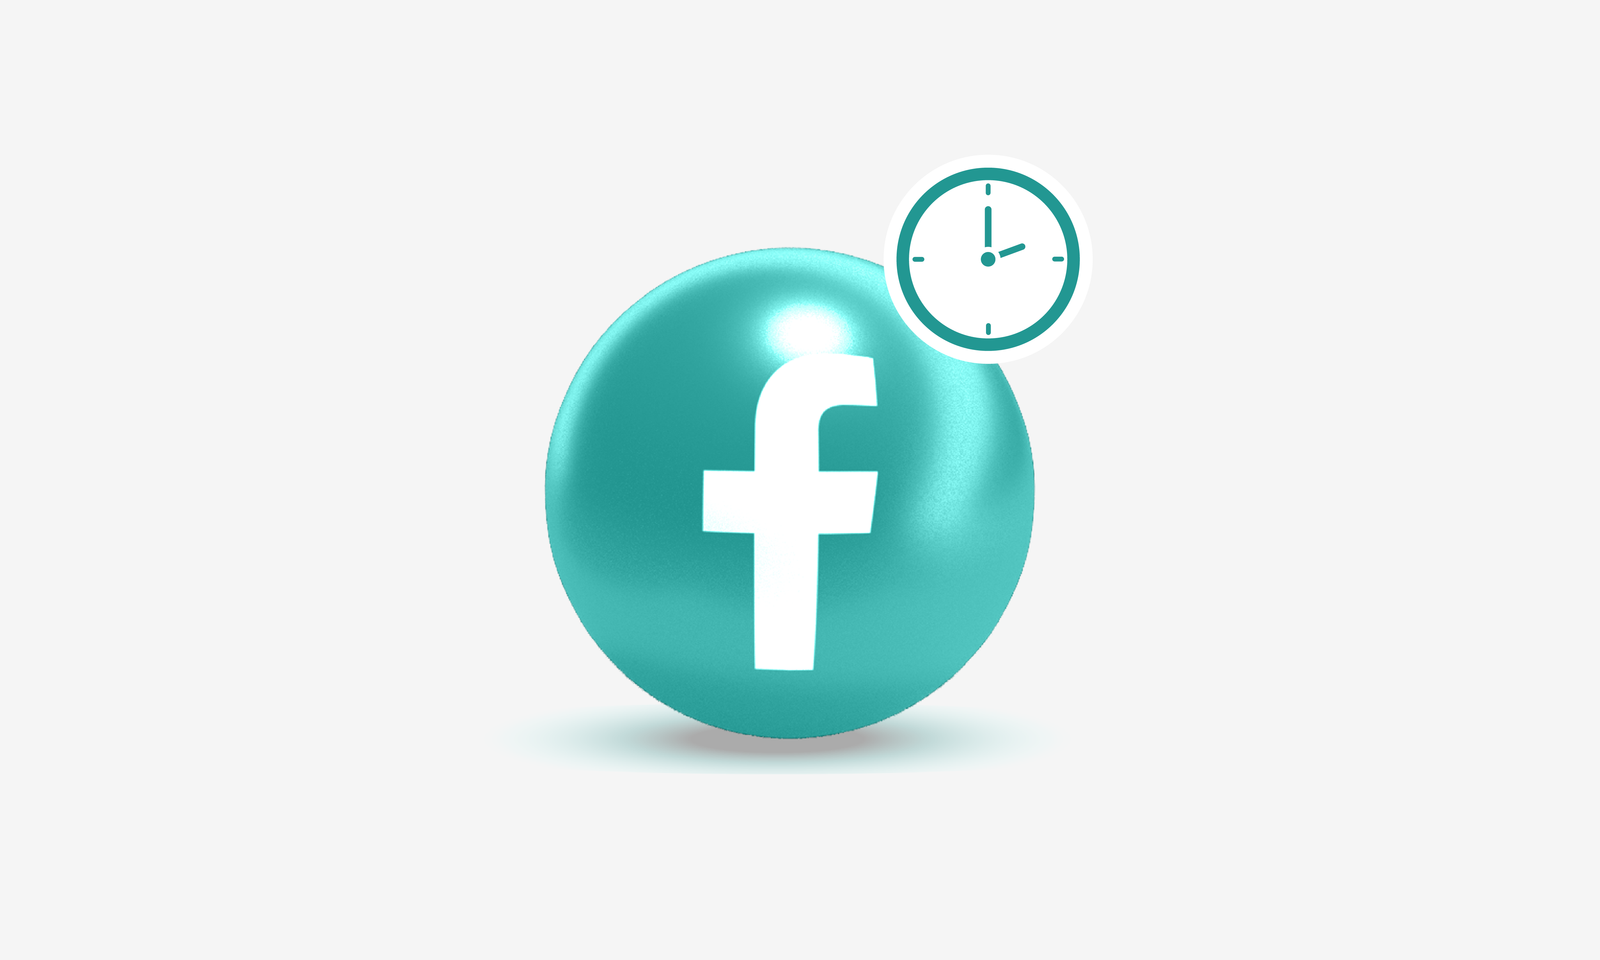 What is the Best Time to Post on Facebook?